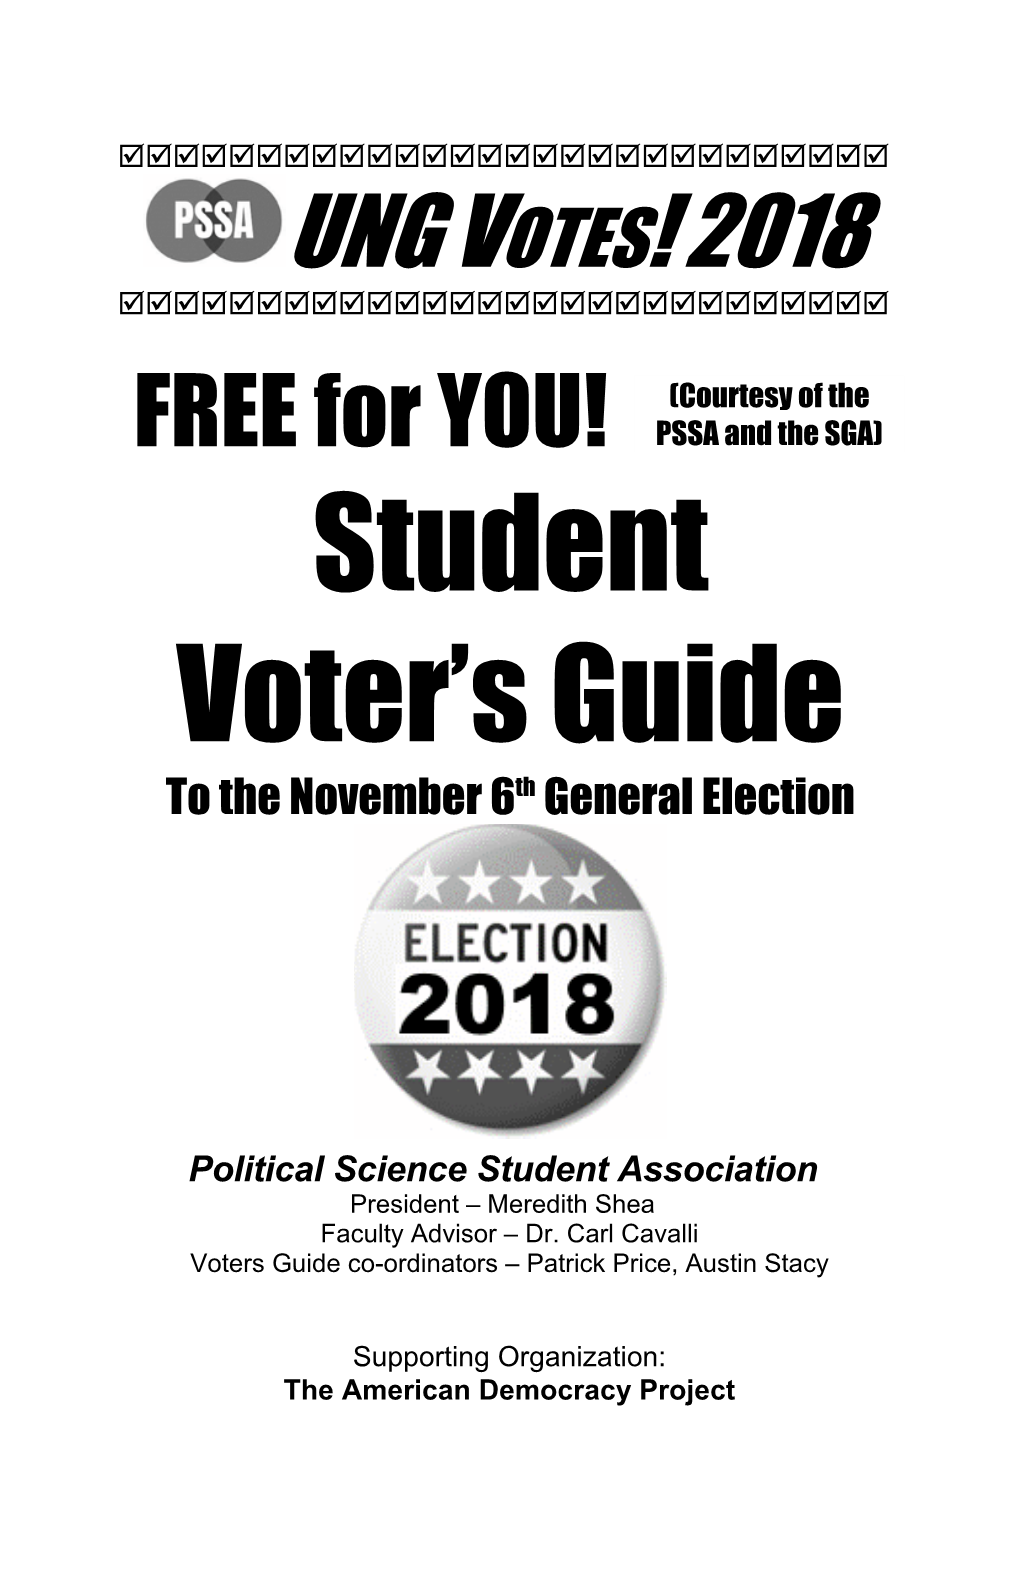 Student Voter's Guide